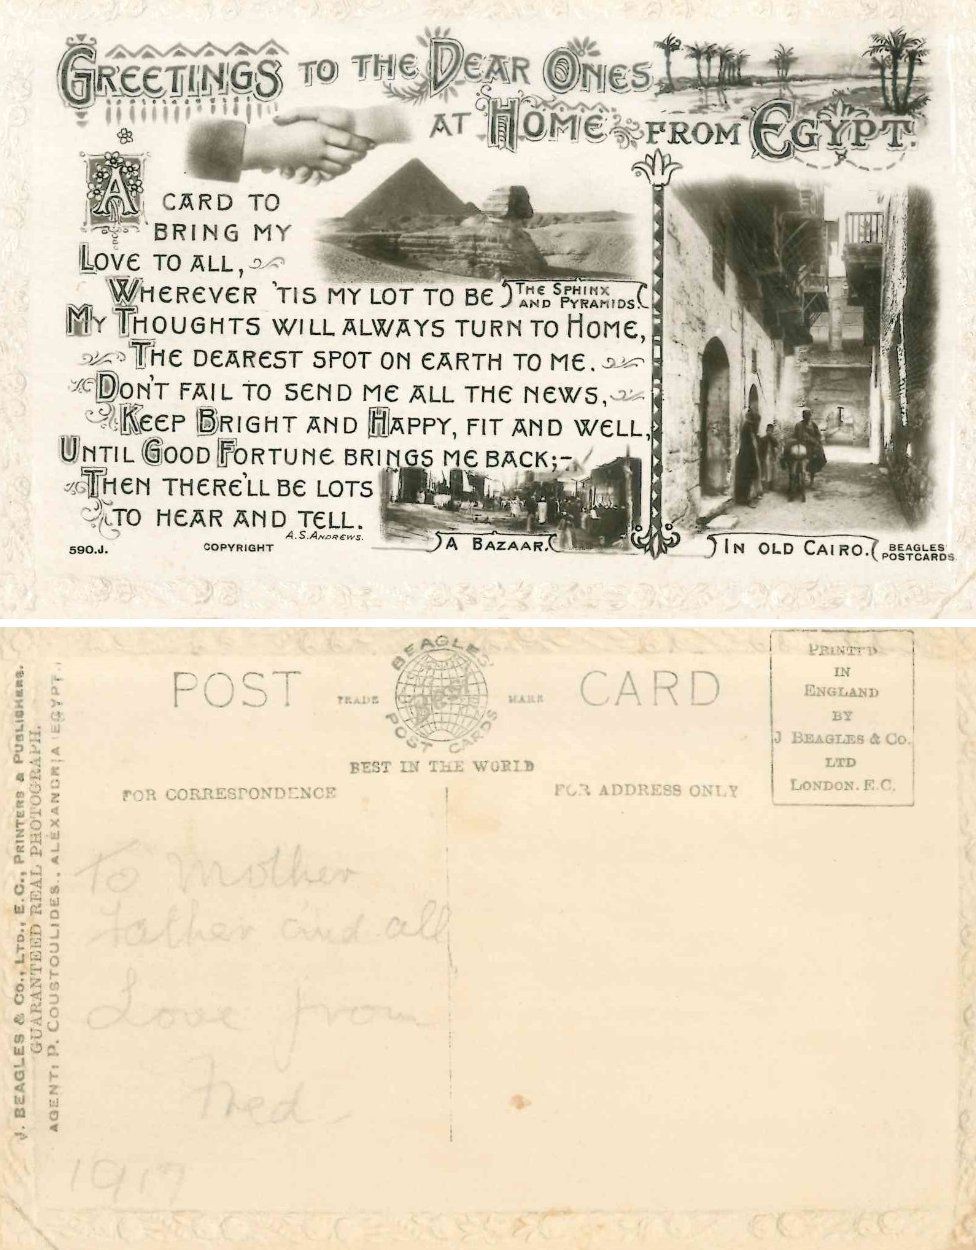 Postcard from Egypt in 1917